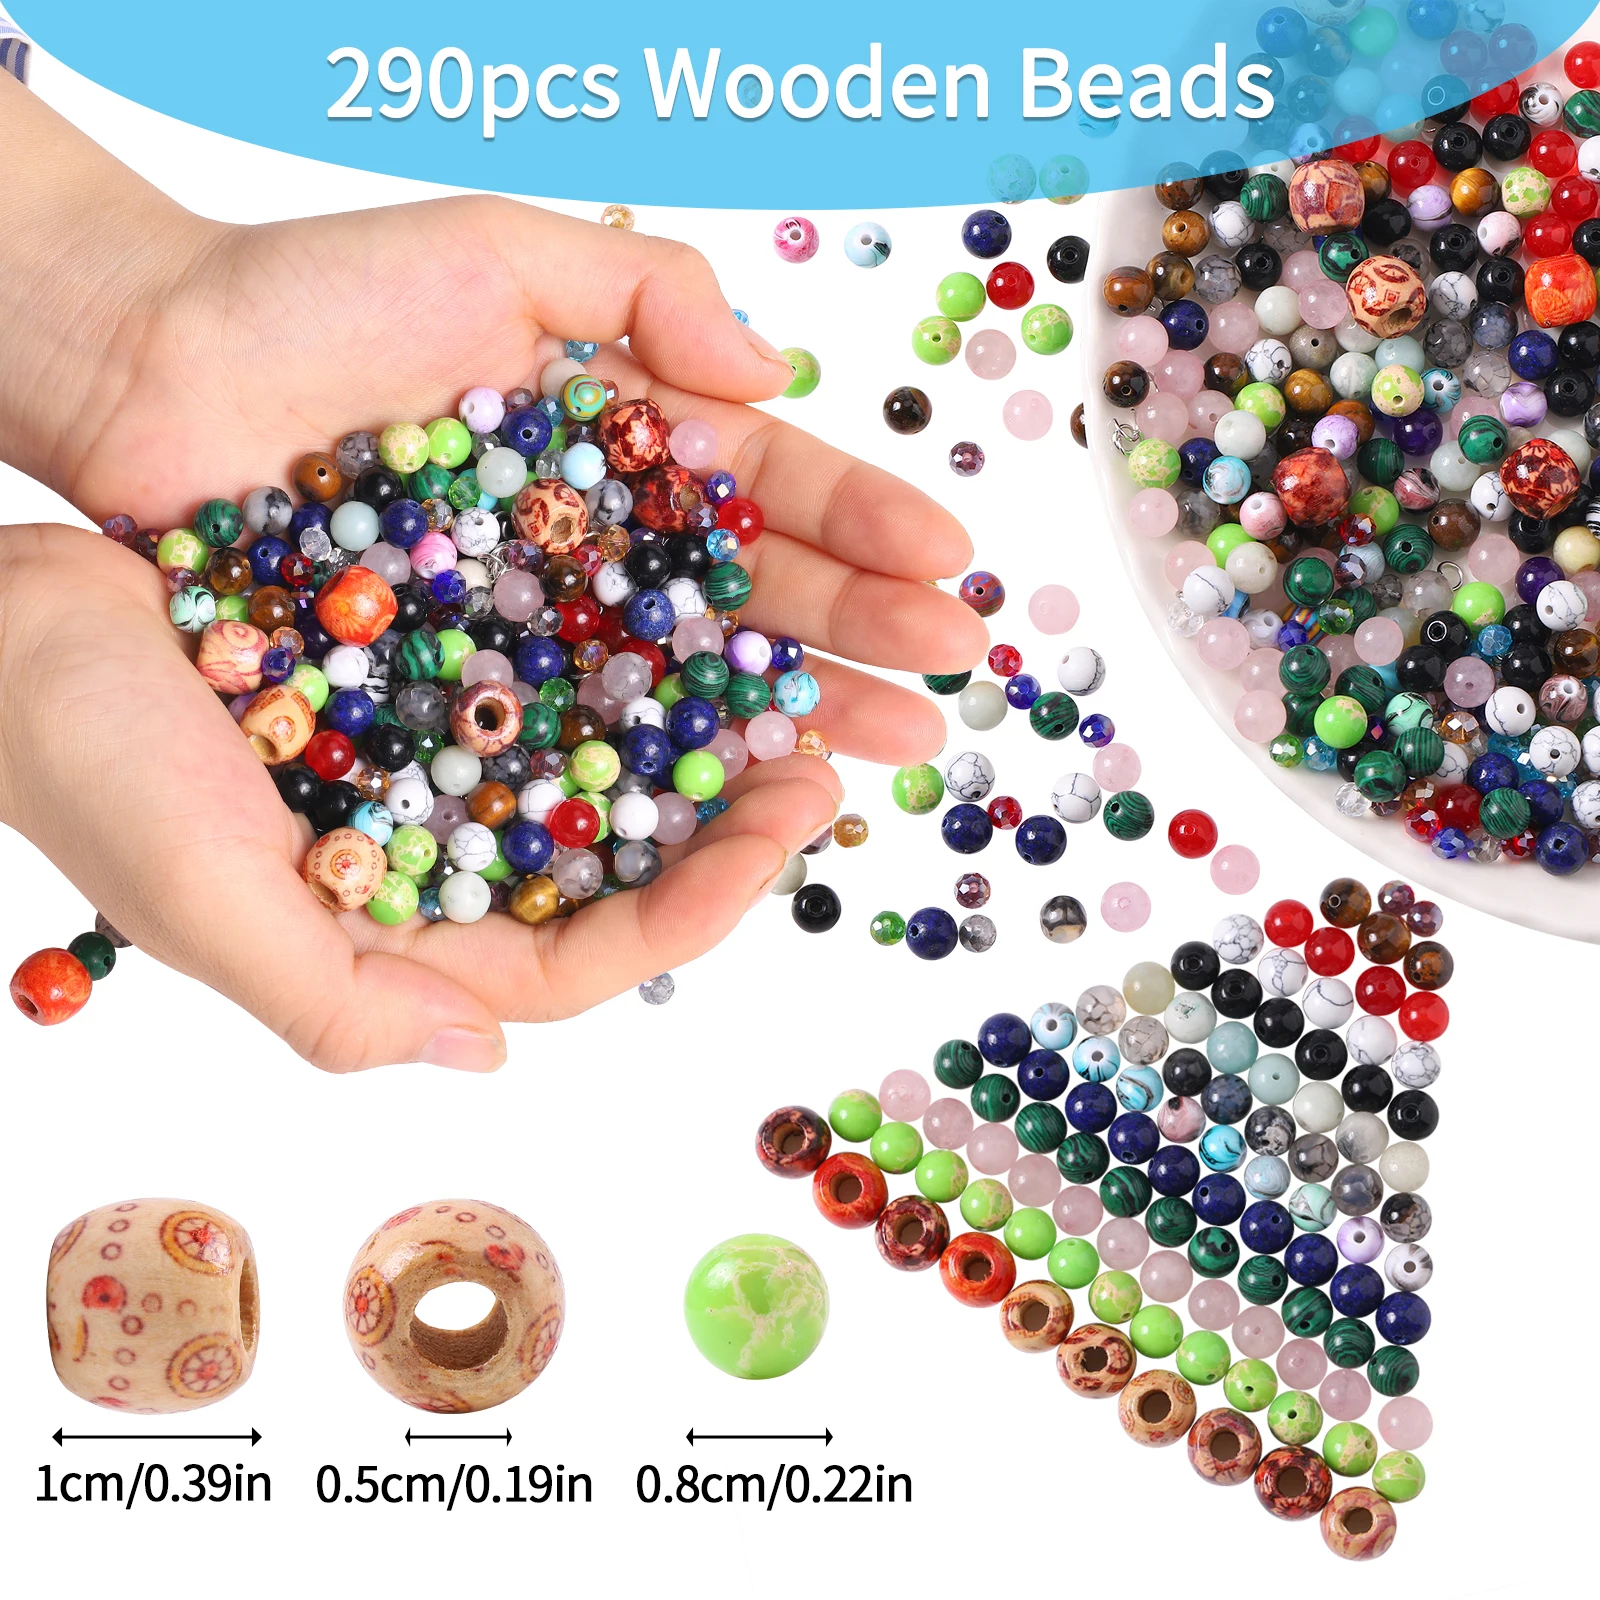 290pcs Wood Handmade DIY Mixed Alphabet Letter Beads send tools Charms Beads for Making Jewelry Handmade Bracelets Accessories reilyn industrial coil nailer mcn55 70 80 pallet nail gun for wood working furniture roofing fencing sheathing making tools